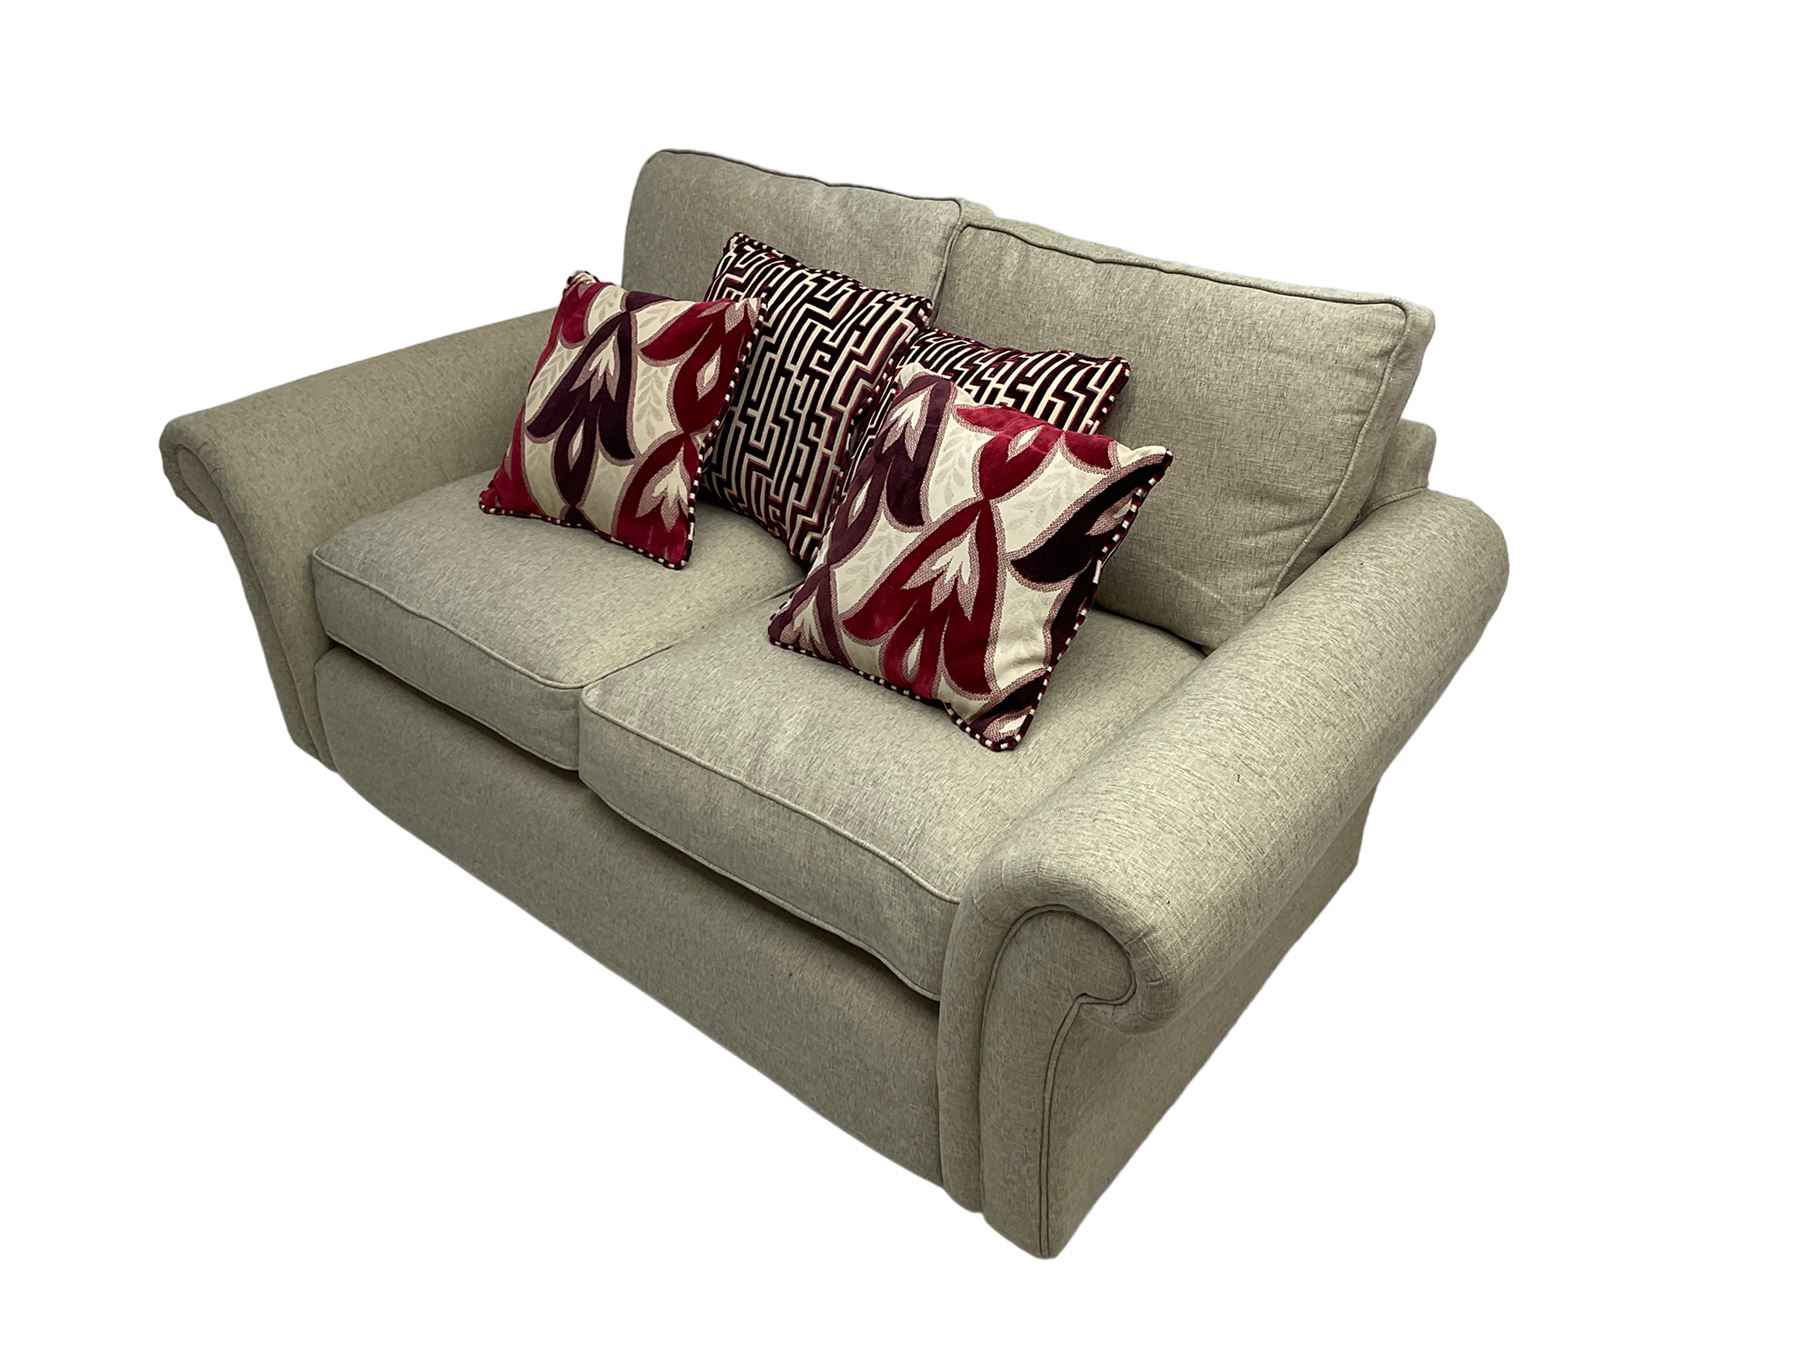 Two seater sofa - Image 4 of 6